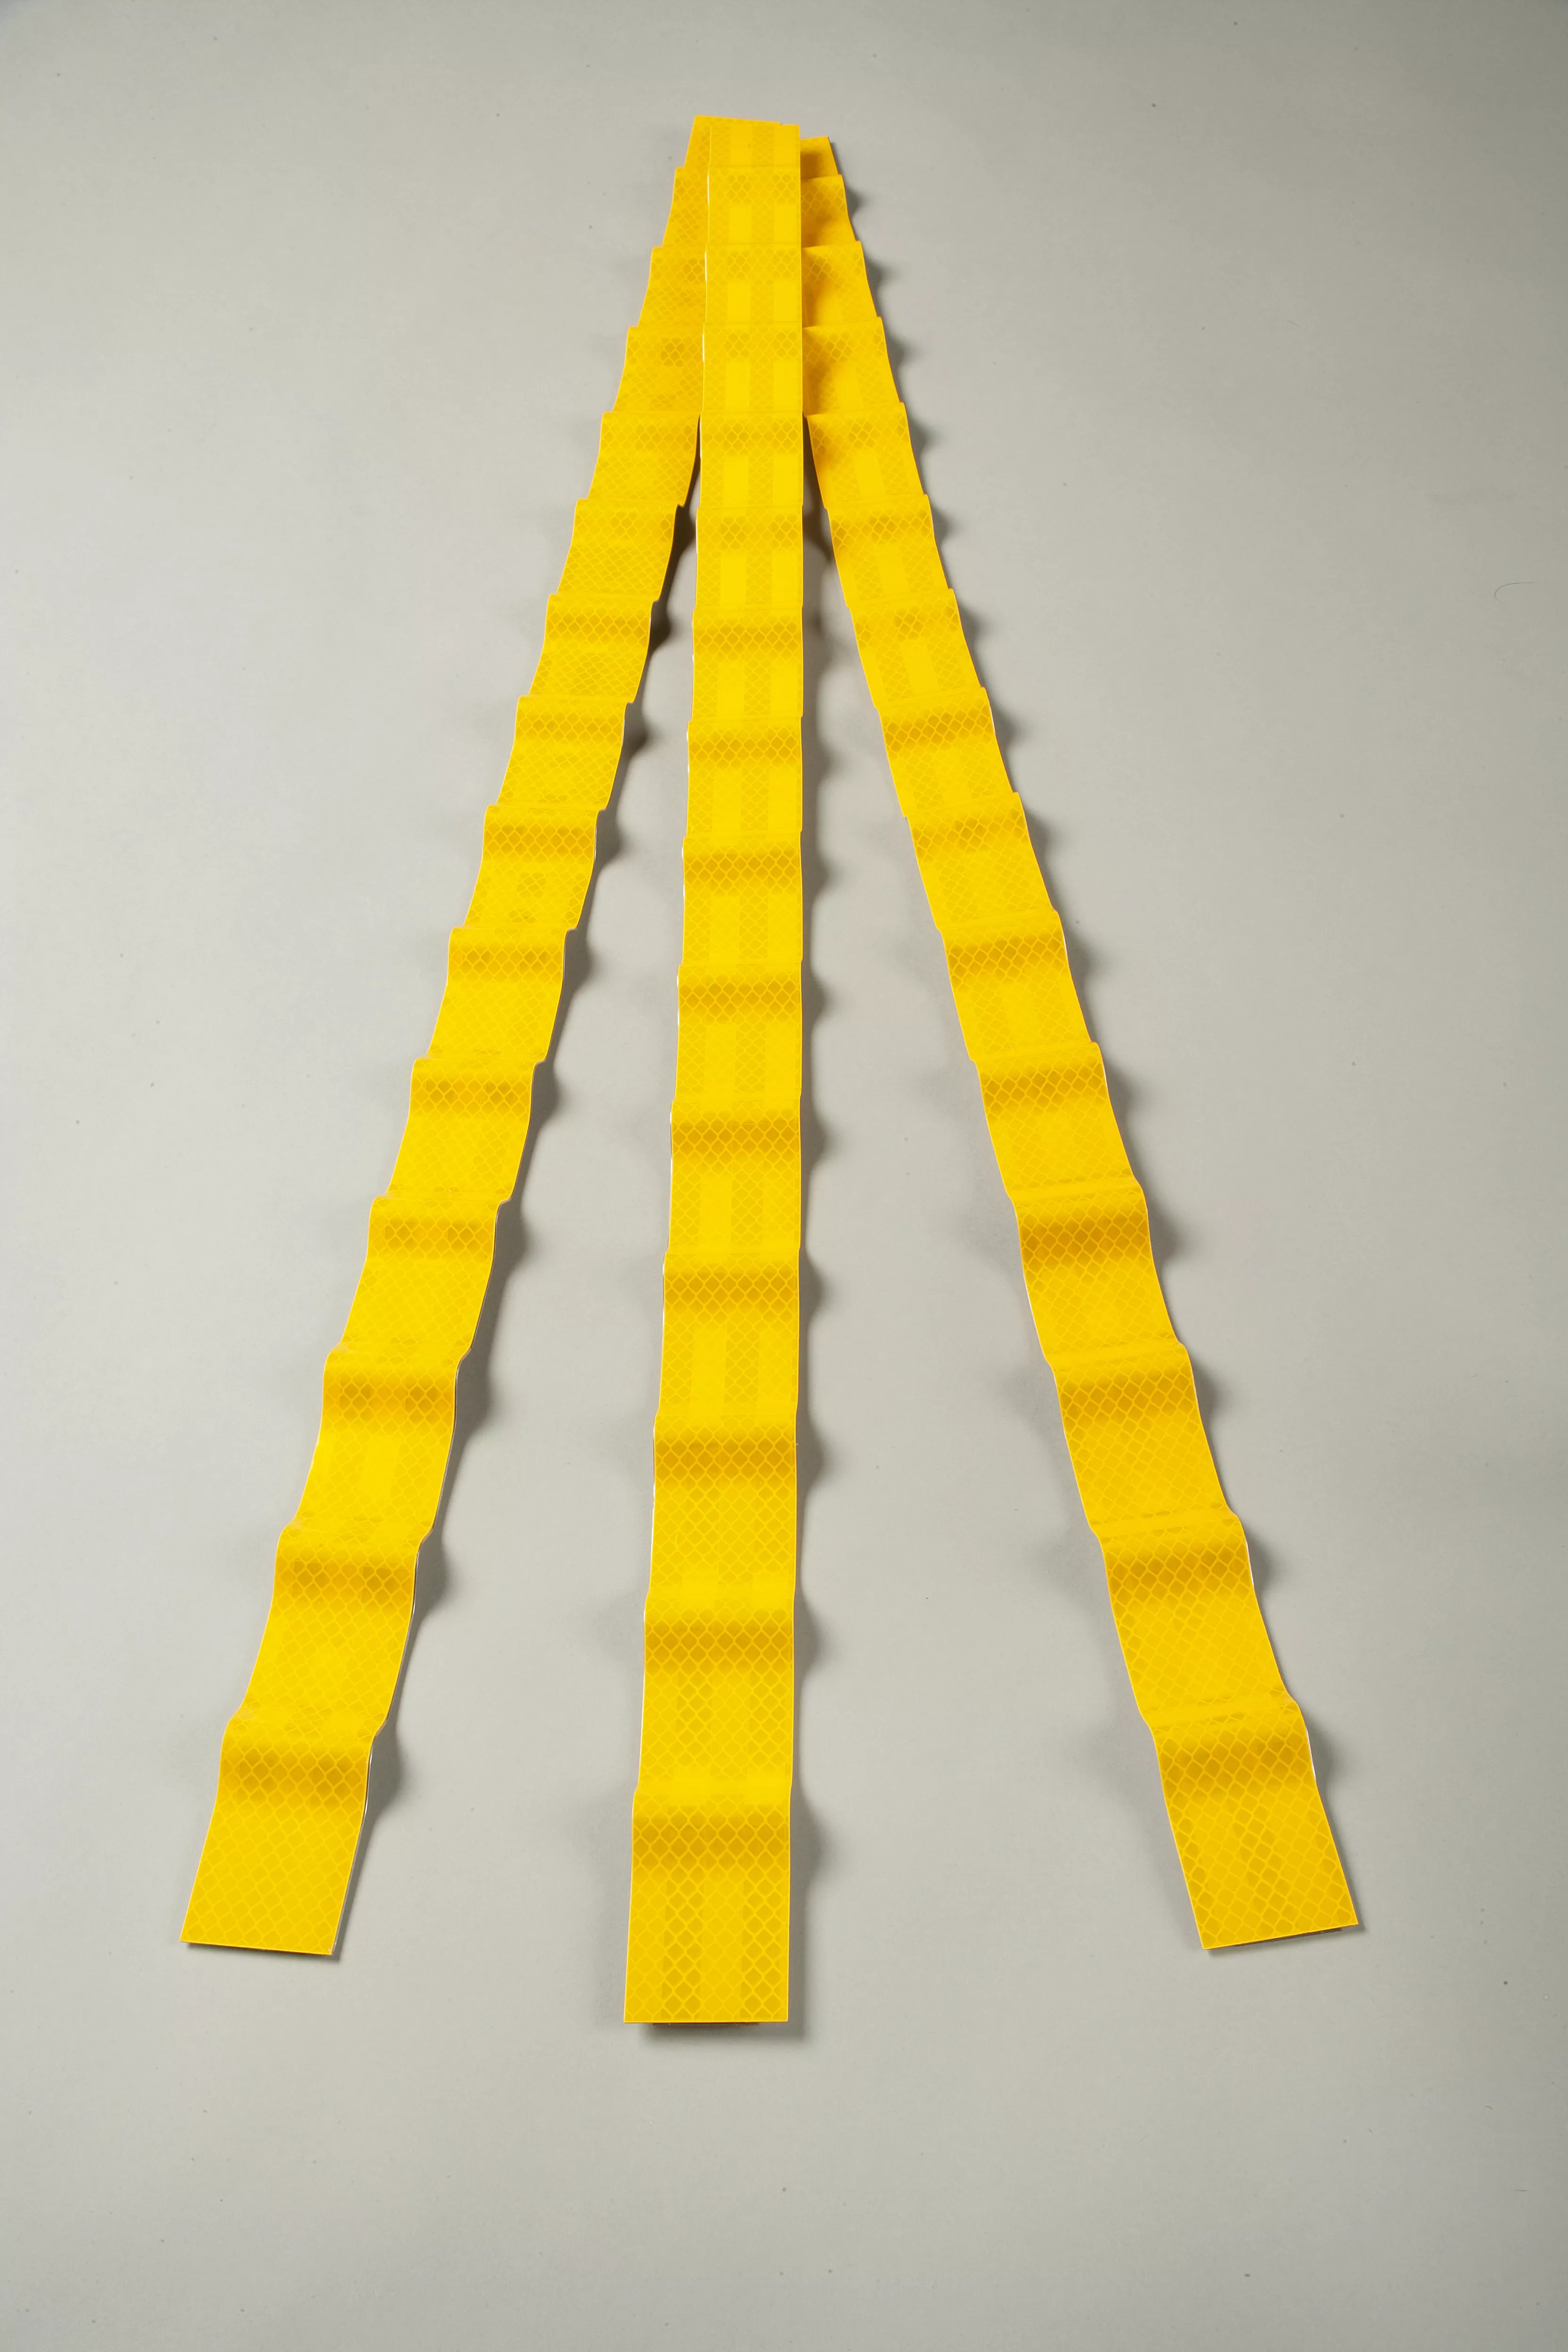 Product Number  | 3M™ Diamond Grade™ Linear Delineation System LDS-Y334 Yellow